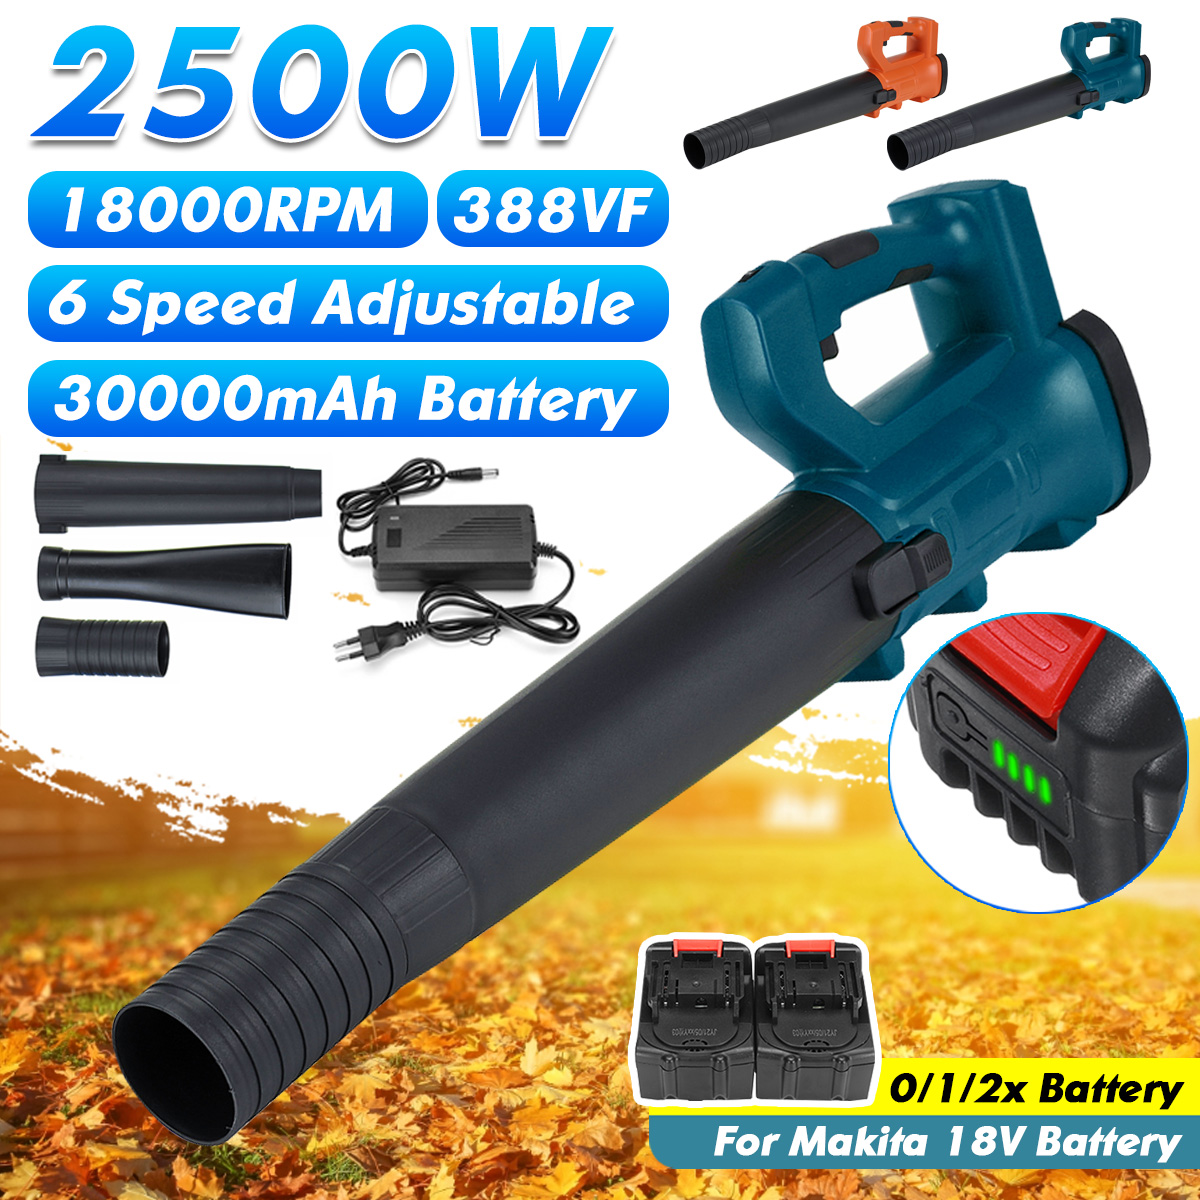 Wolike-2500W-388VF-Cordless-Electric-Air-Blower-Handheld-Leaf-Blower-Dust-Collector-Sweeper-Garden-T-1931058-2